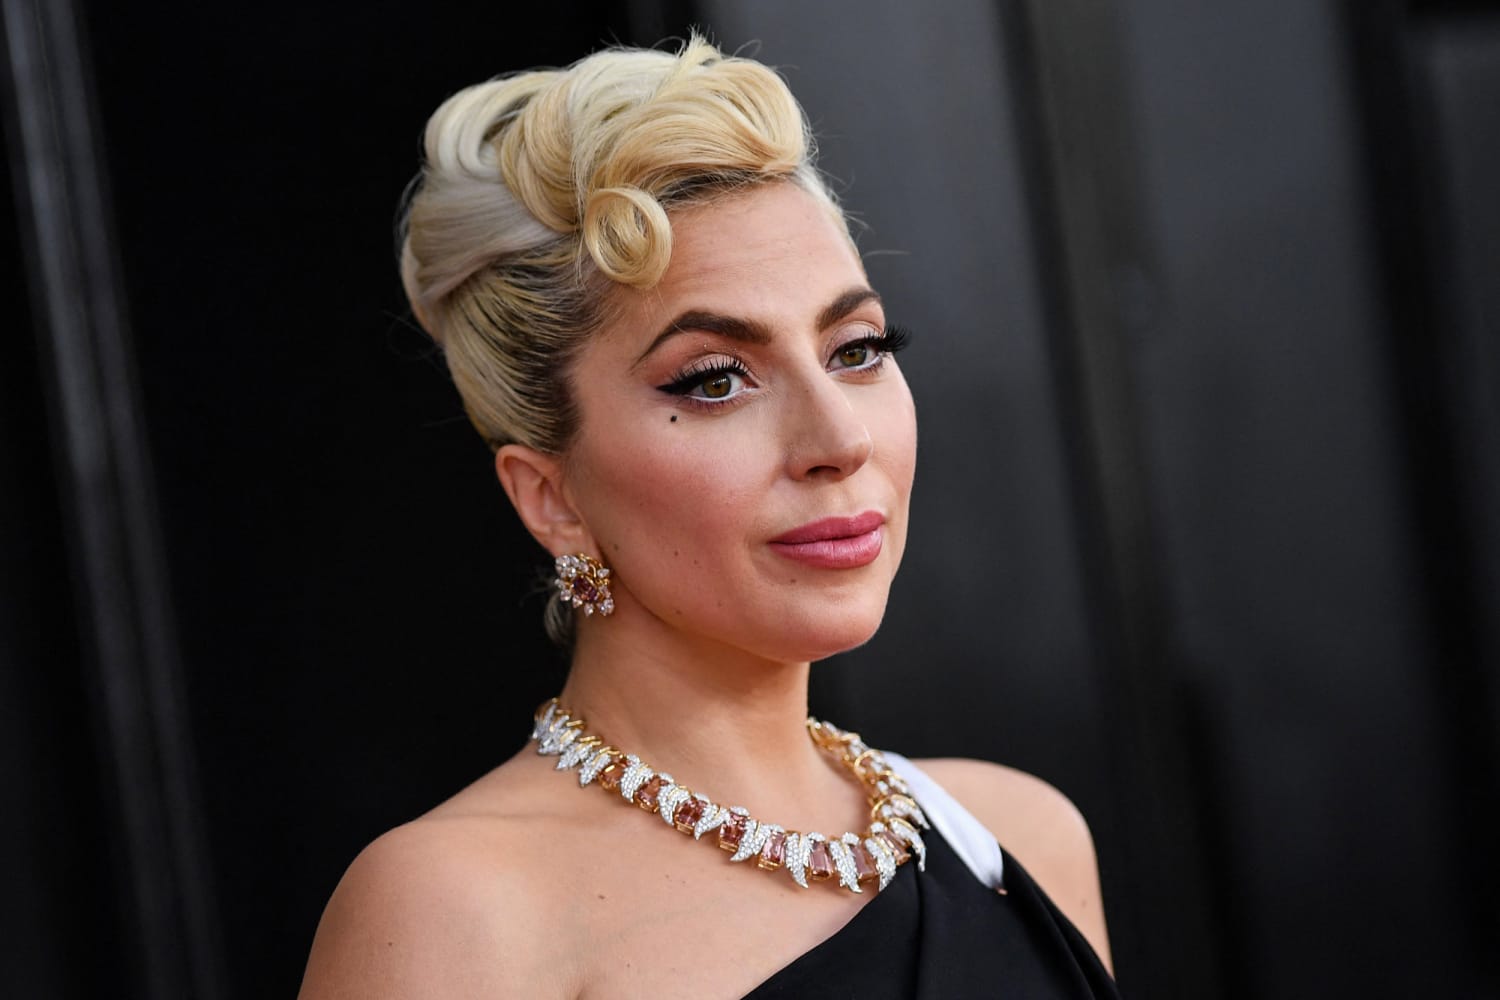 Woman charged in connection with dognapping Lady Gaga's pets sues for $500,000 reward